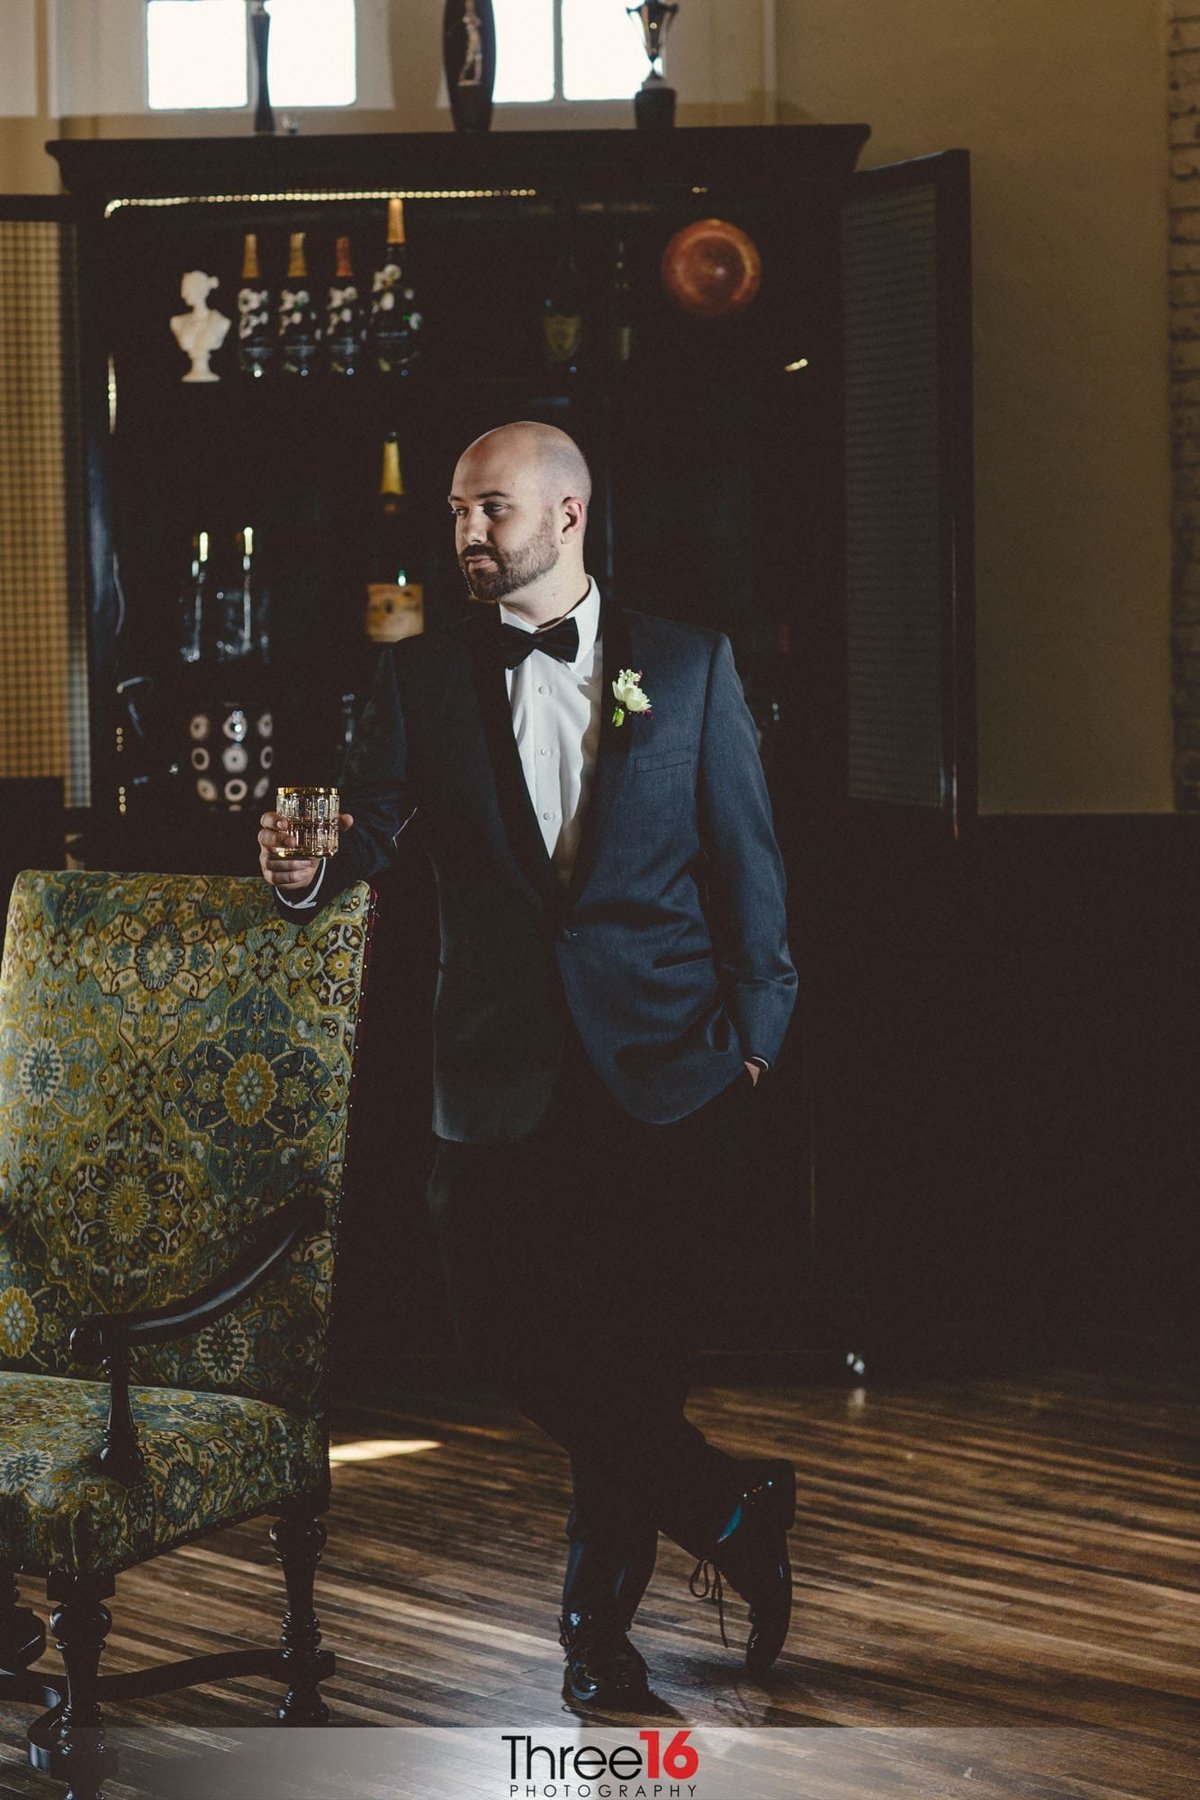 Groom poses in the lounge area holding a drink